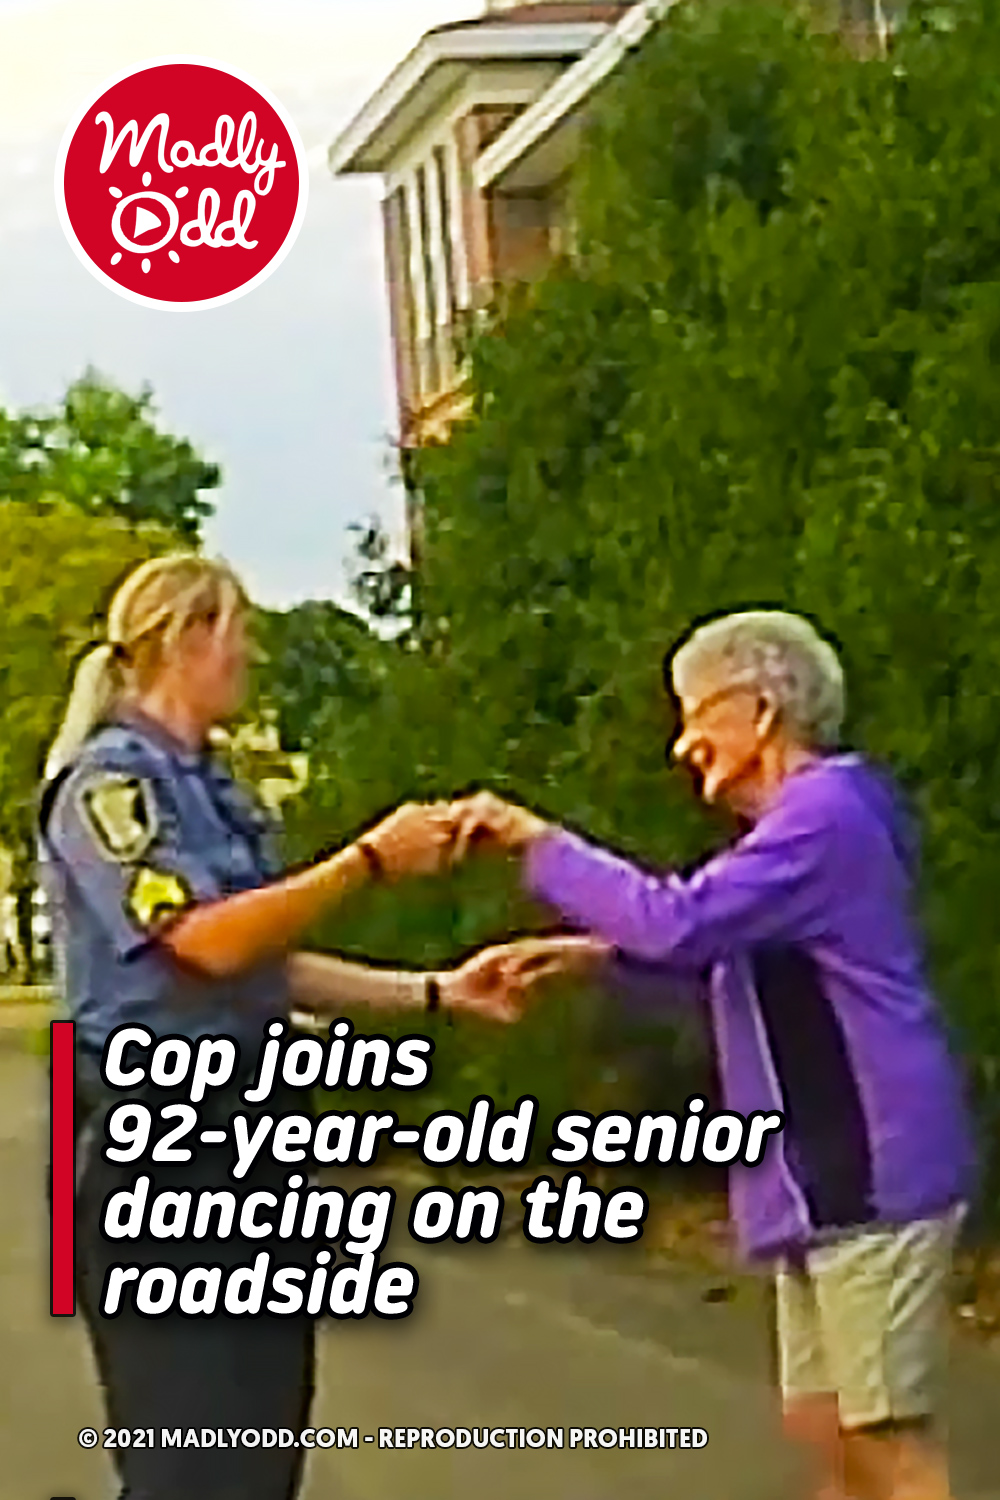 Cop joins 92-year-old senior dancing on the roadside